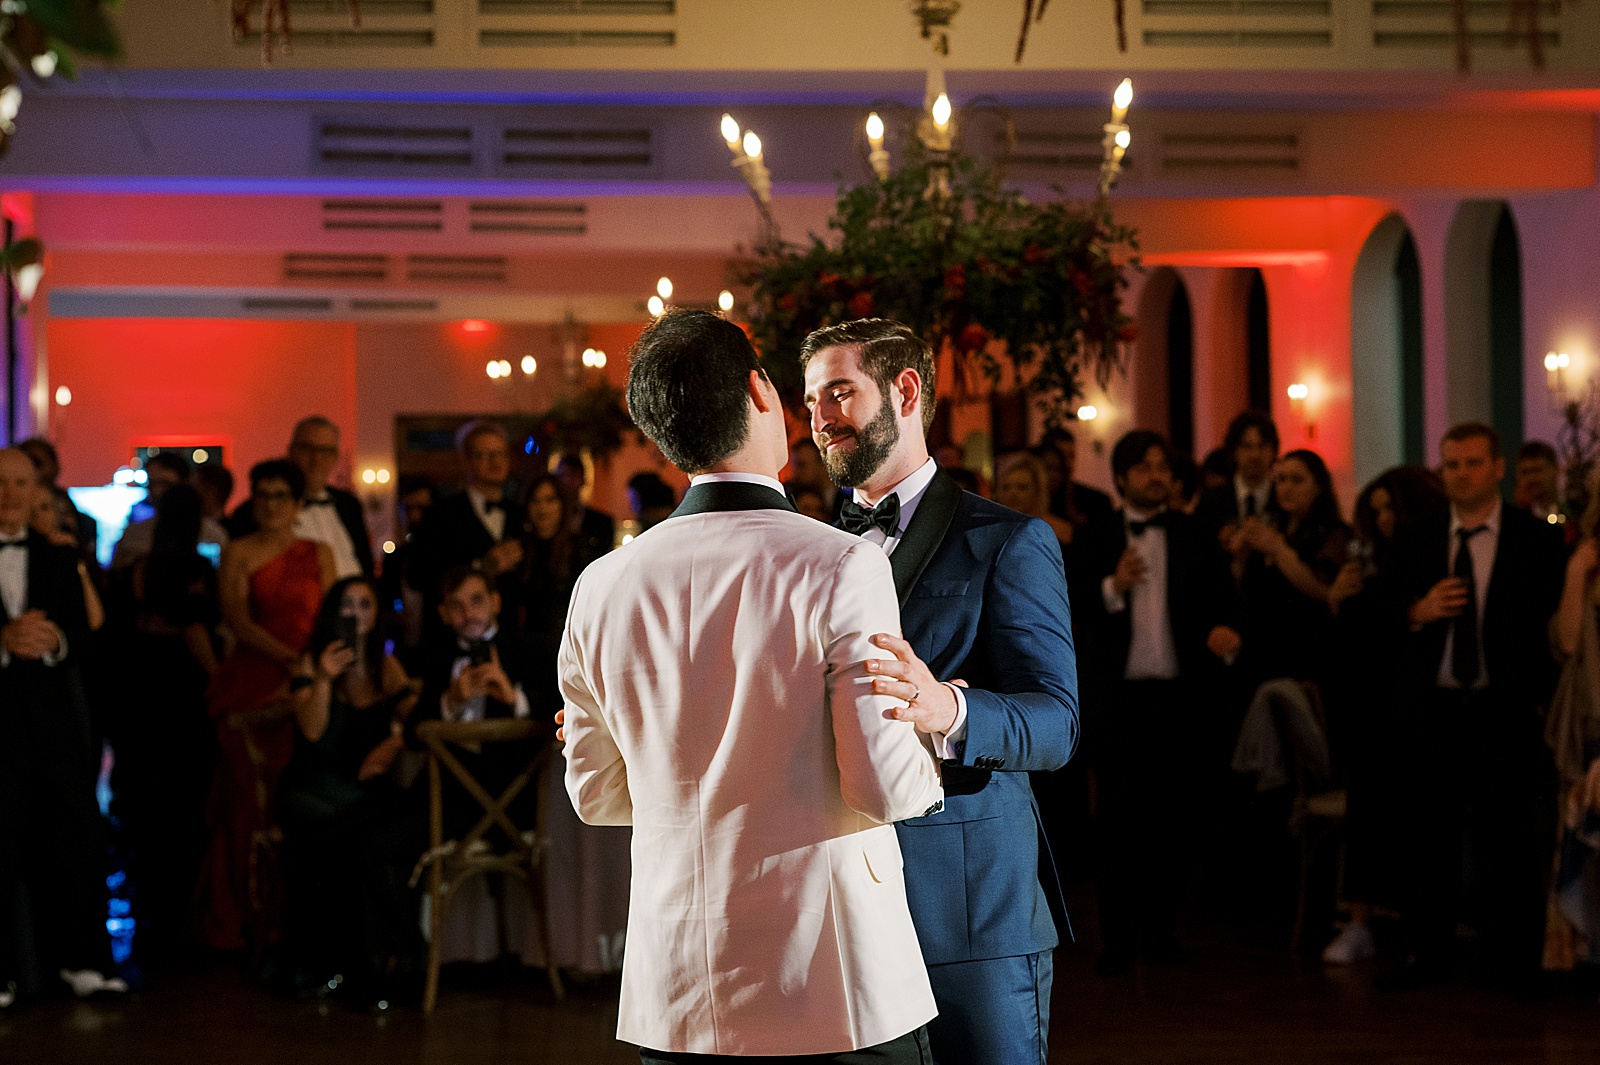 Two grooms share their first dance at Il Mercato.